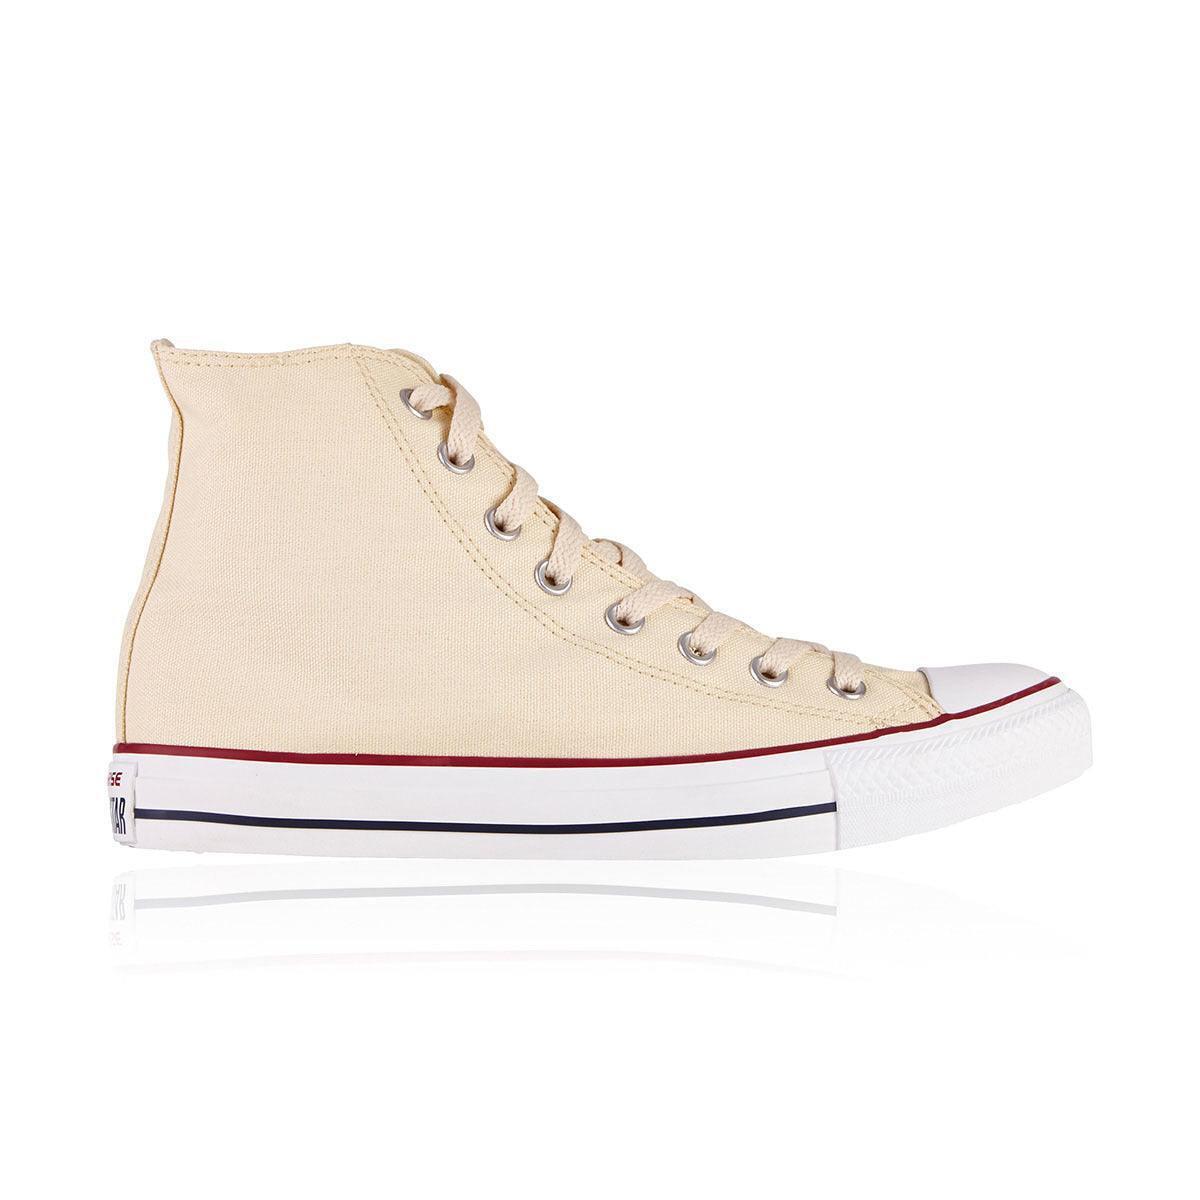 Converse - Chuck Taylor All Star Hi Top Unisex Shoes - Mens US 4.5/Womens US 6.5 - Unbleached White